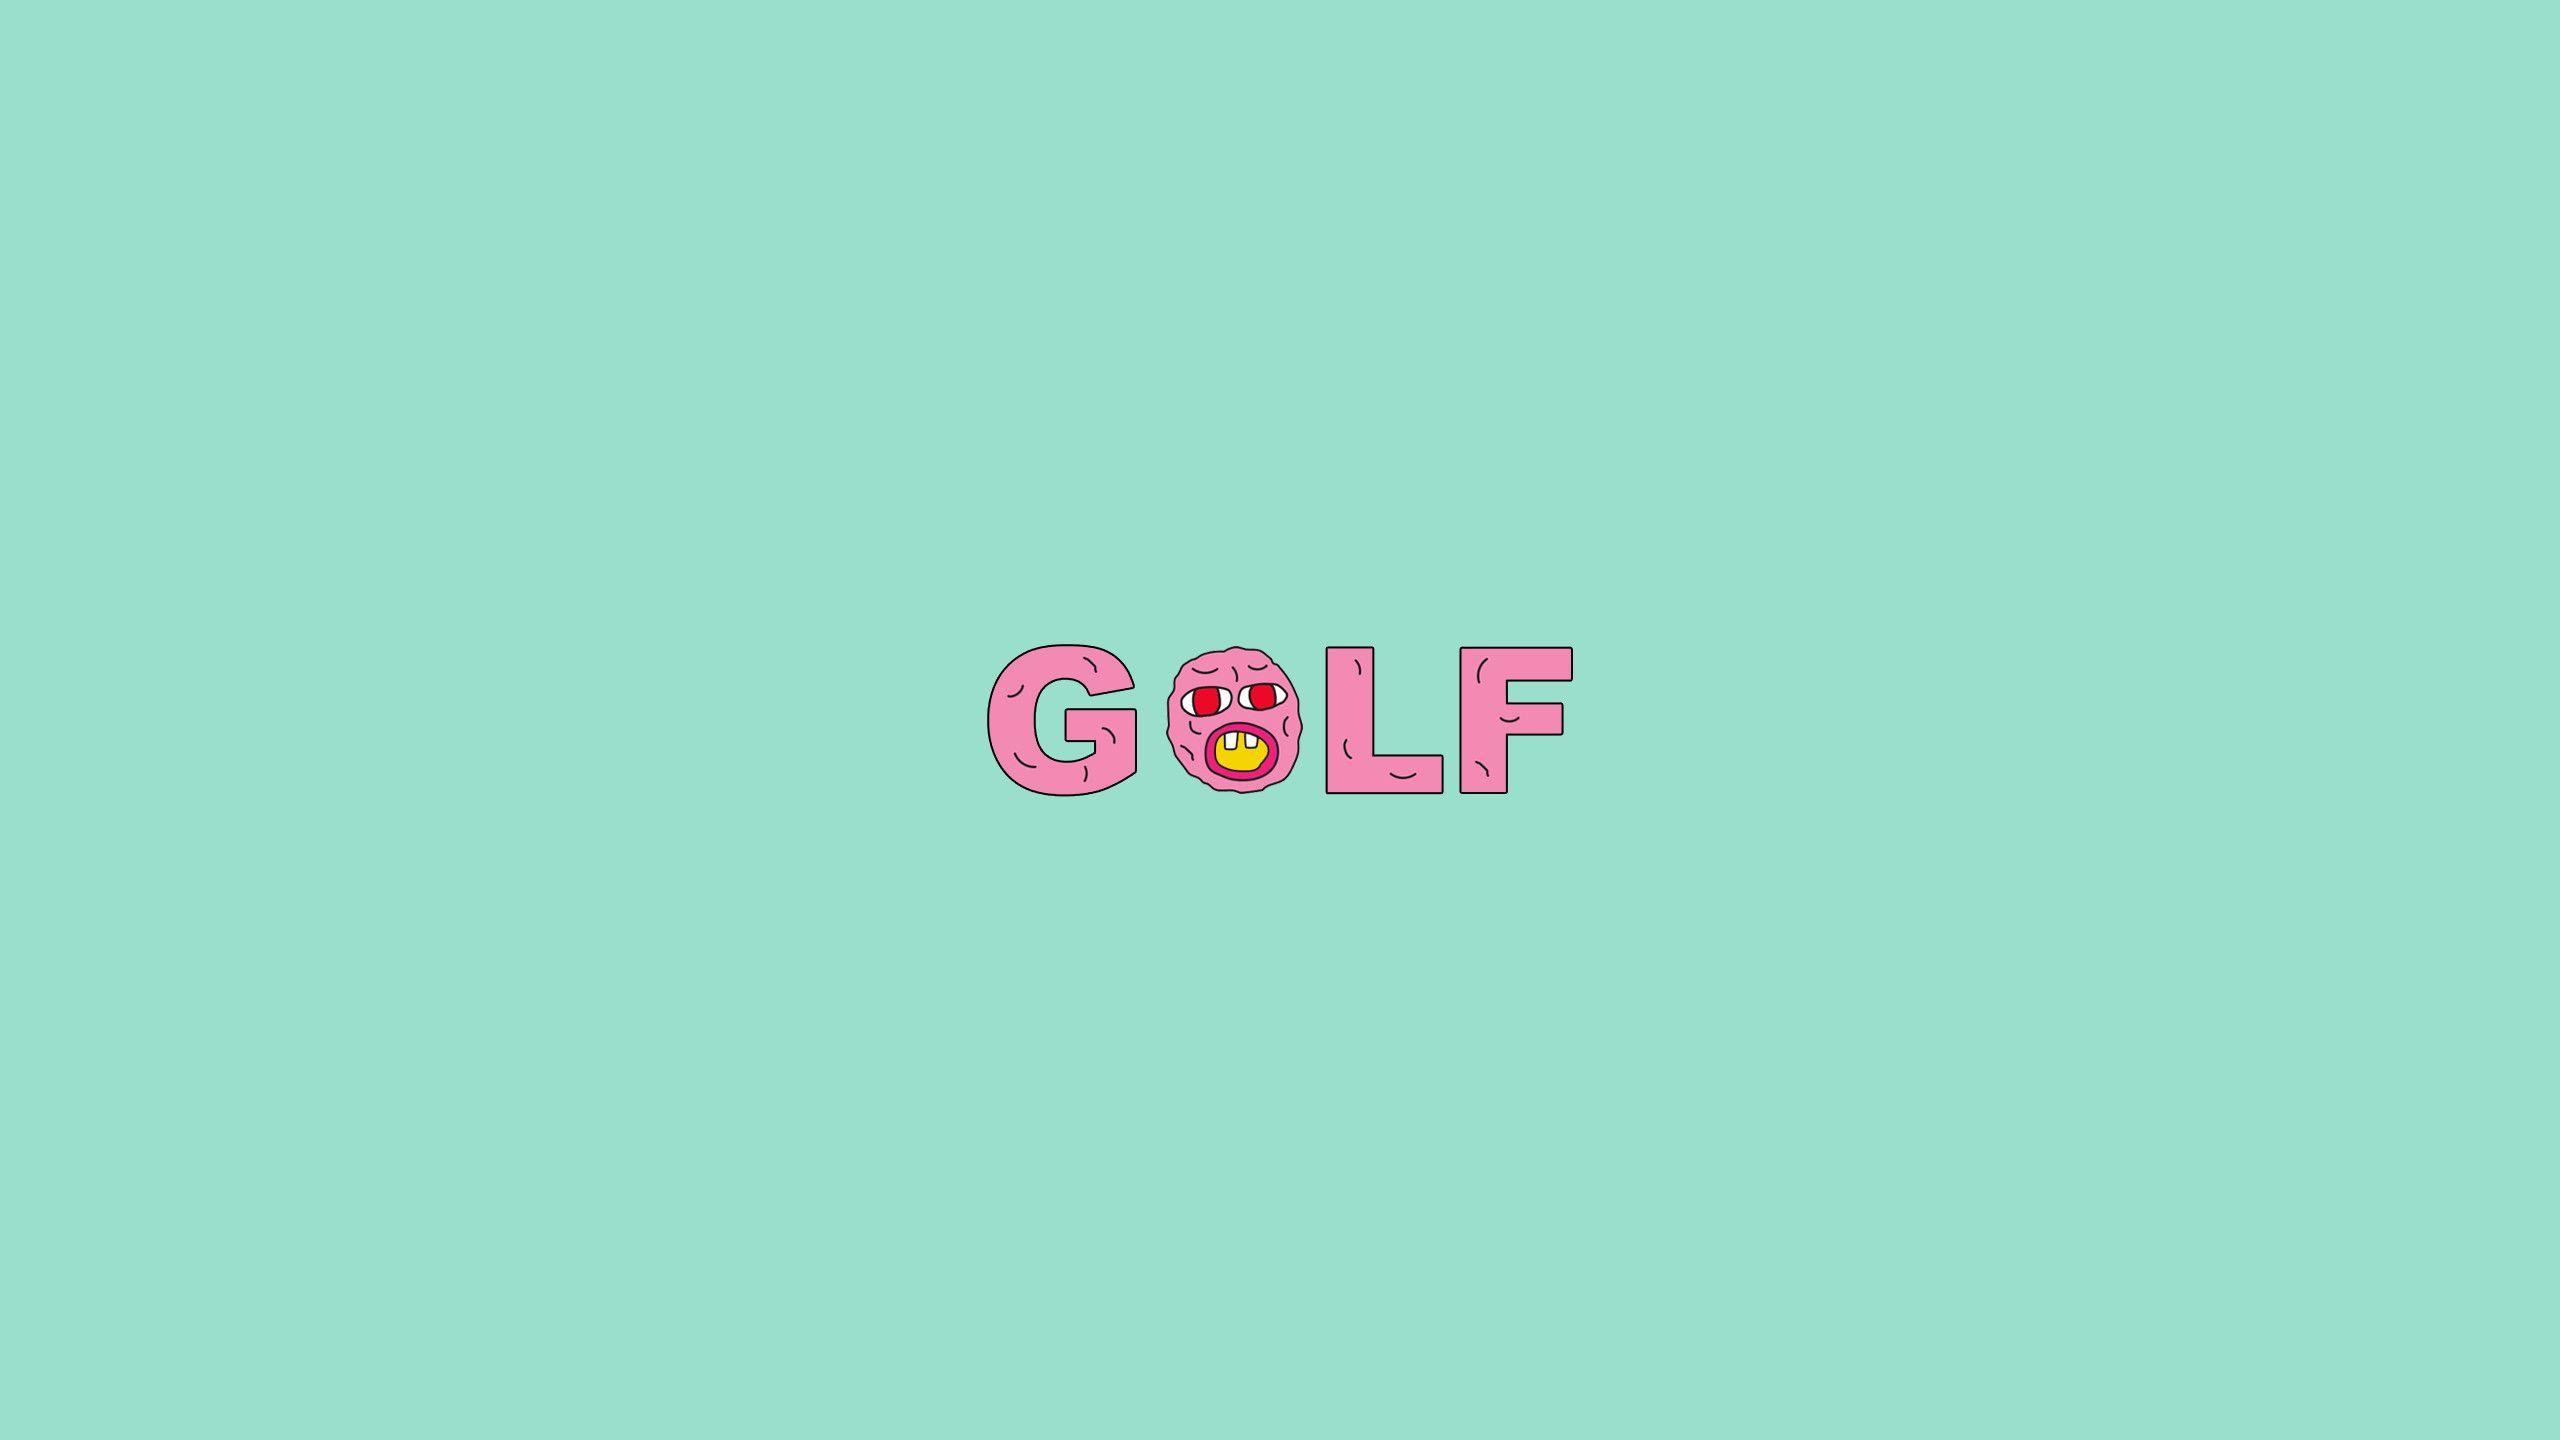 Download Chase Your Dreams In Style with Golf Le Fleur Wallpaper   Wallpaperscom